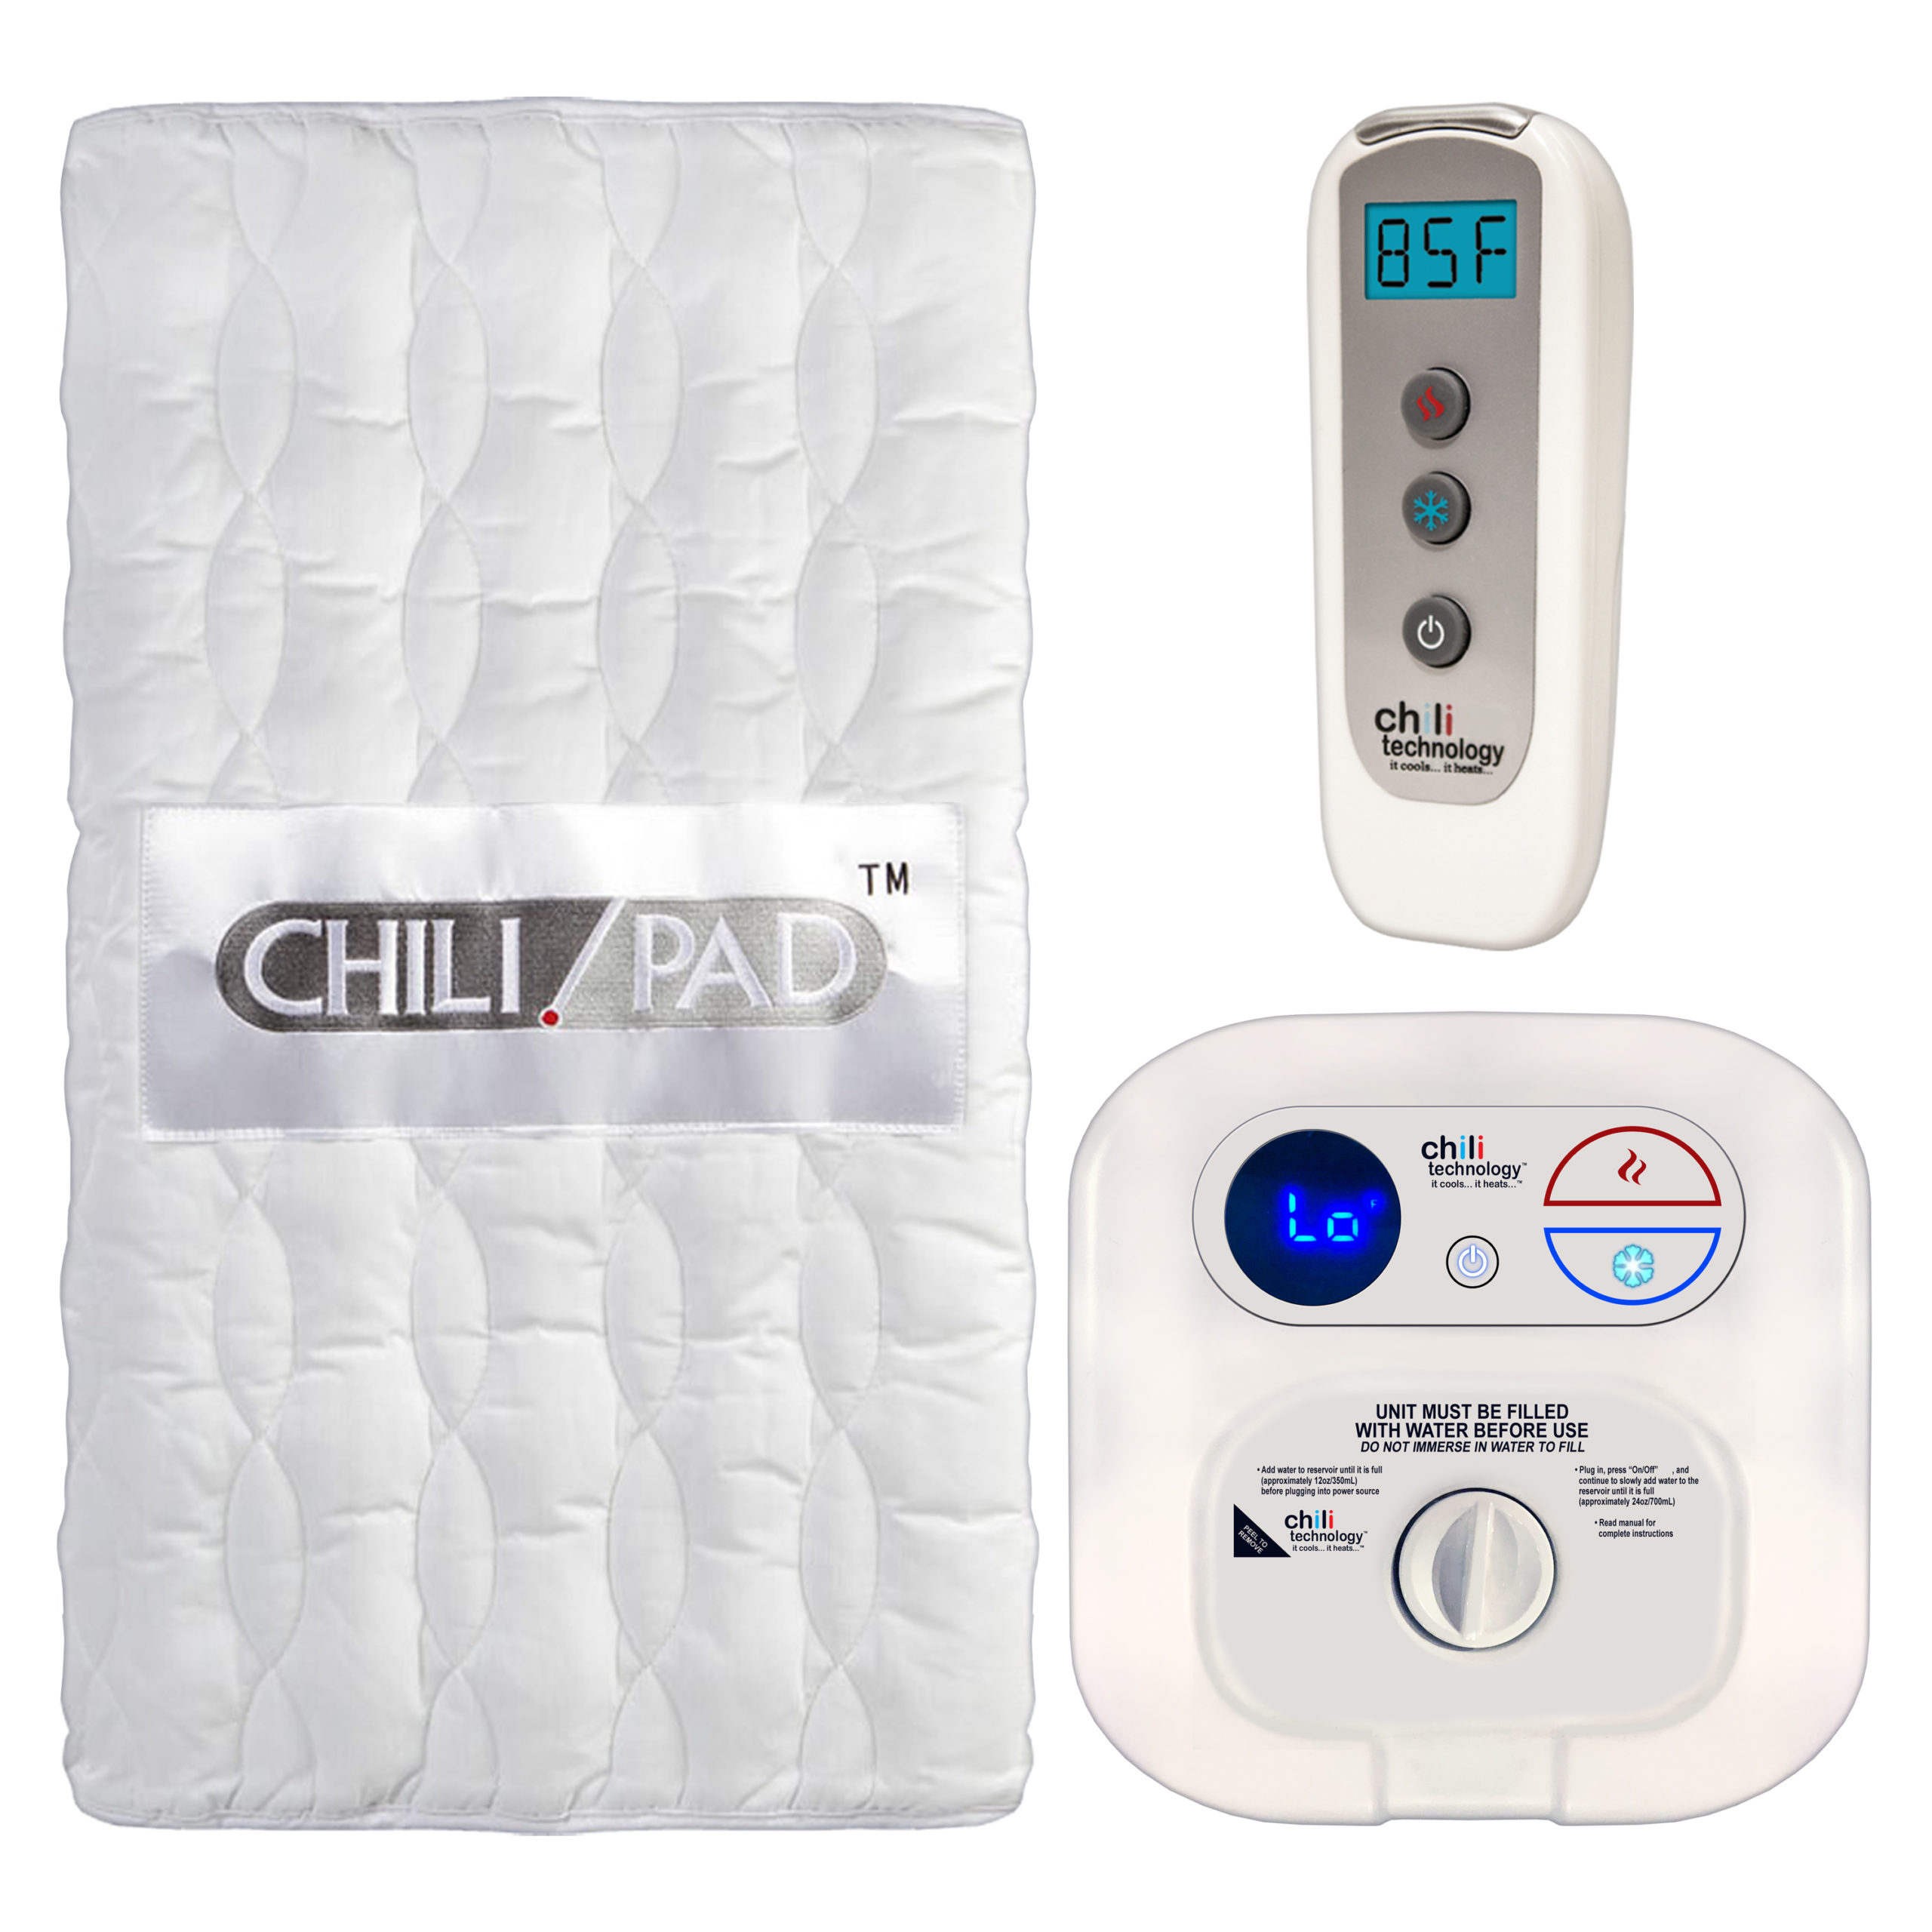 Naptime Cards - Chilipad|Temperature|Mattress|Cube|Sleep|Bed|Water|System|Pad|Ooler|Control|Unit|Night|Bedjet|Technology|Side|Air|Product|Review|Body|Time|Degrees|Noise|Price|Pod|Tubes|Heat|Device|Cooling|Room|King|App|Features|Size|Cover|Sleepers|Sheets|Energy|Warranty|Quality|Mattress Pad|Control Unit|Cube Sleep System|Sleep Pod|Distilled Water|Remote Control|Sleep System|Desired Temperature|Water Tank|Chilipad Cube|Chili Technology|Deep Sleep|Pro Cover|Ooler Sleep System|Hydrogen Peroxide|Cool Mesh|Sleep Temperature|Fitted Sheet|Pod Pro|Sleep Quality|Smartphone App|Sleep Systems|Chilipad Sleep System|New Mattress|Sleep Trial|Full Refund|Mattress Topper|Body Heat|Air Flow|Chilipad Review